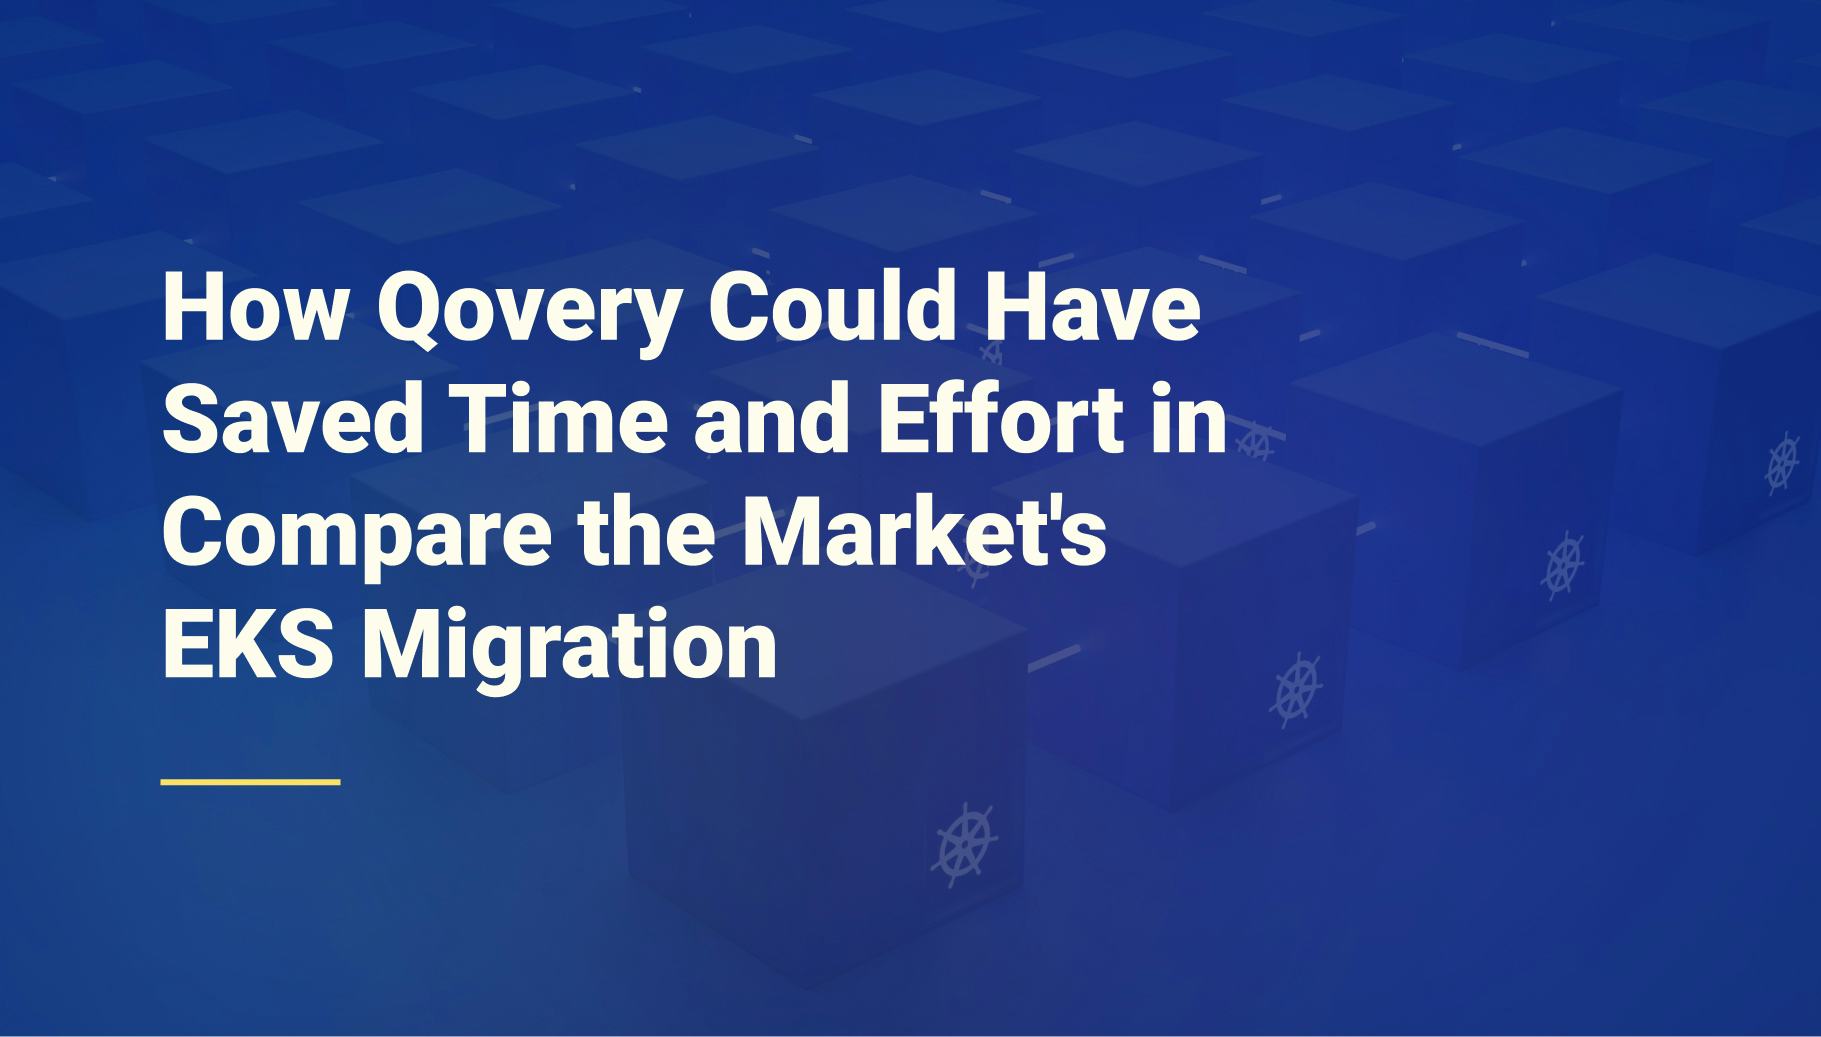 How Qovery Could Have Saved Time and Effort in Compare the Market's EKS Migration - Qovery